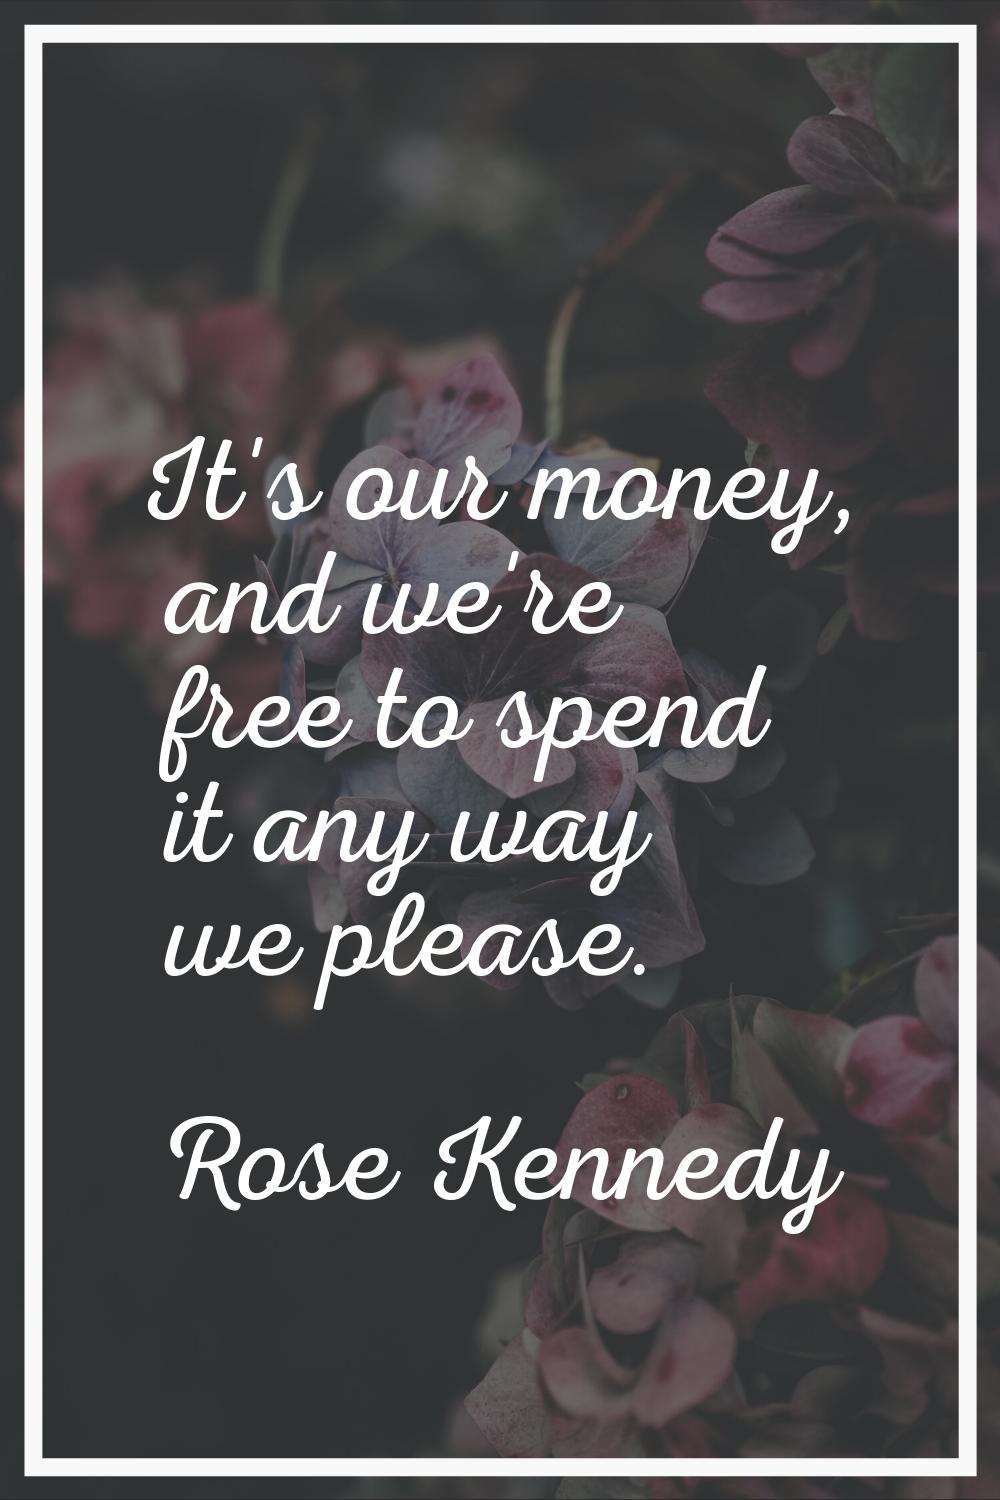 It's our money, and we're free to spend it any way we please.